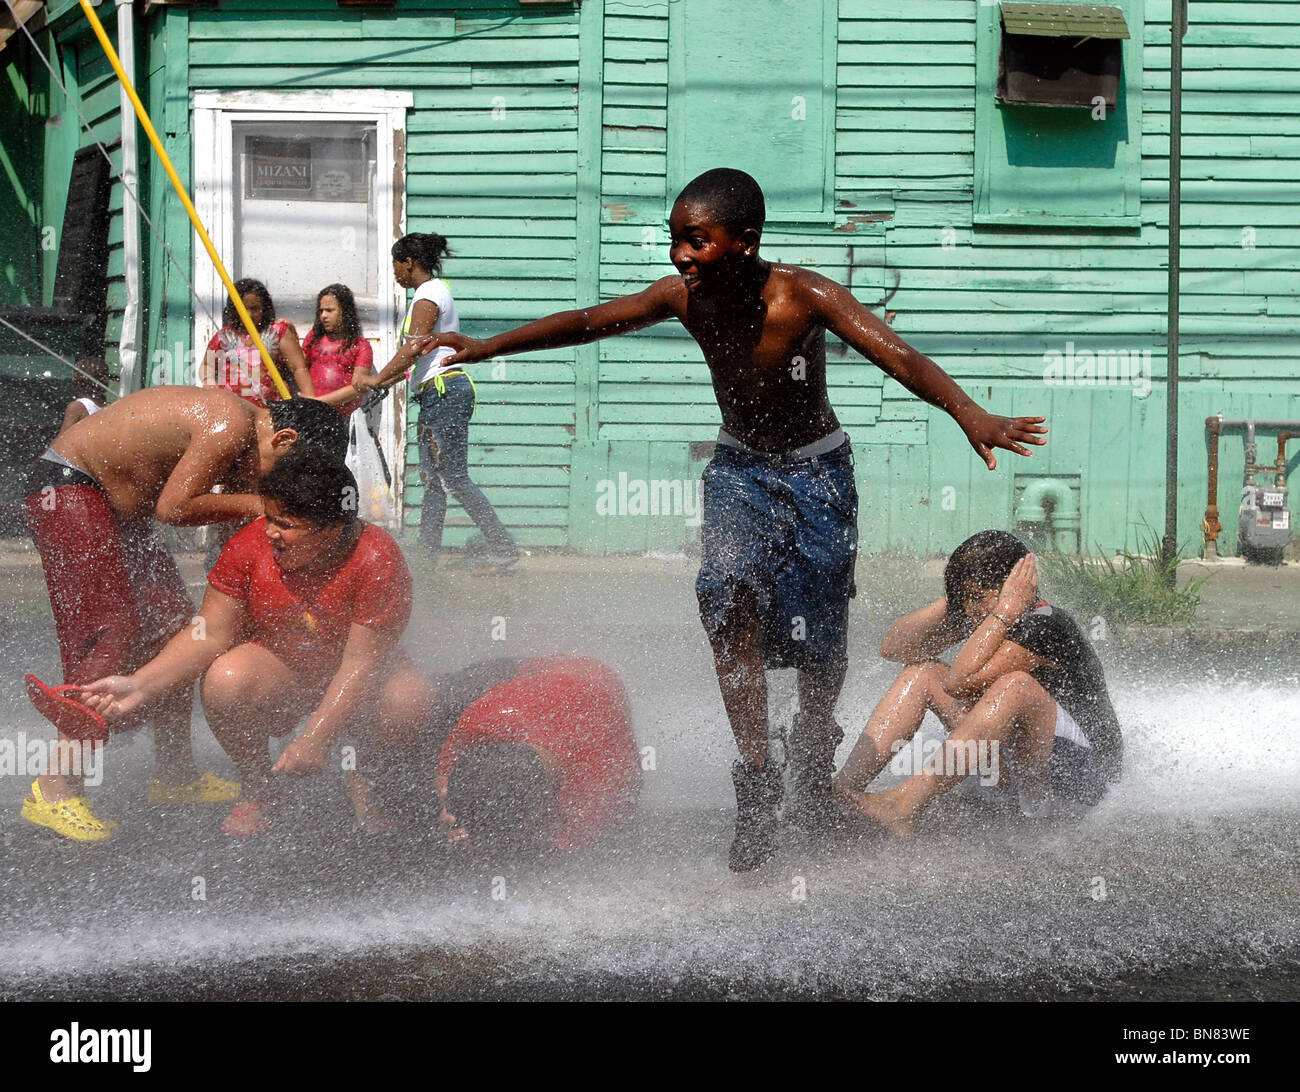 Children in New Haven CT USA cool off in an illegally opened fire hydrant during a summer heat wave with 100 F temps. Stock Photo